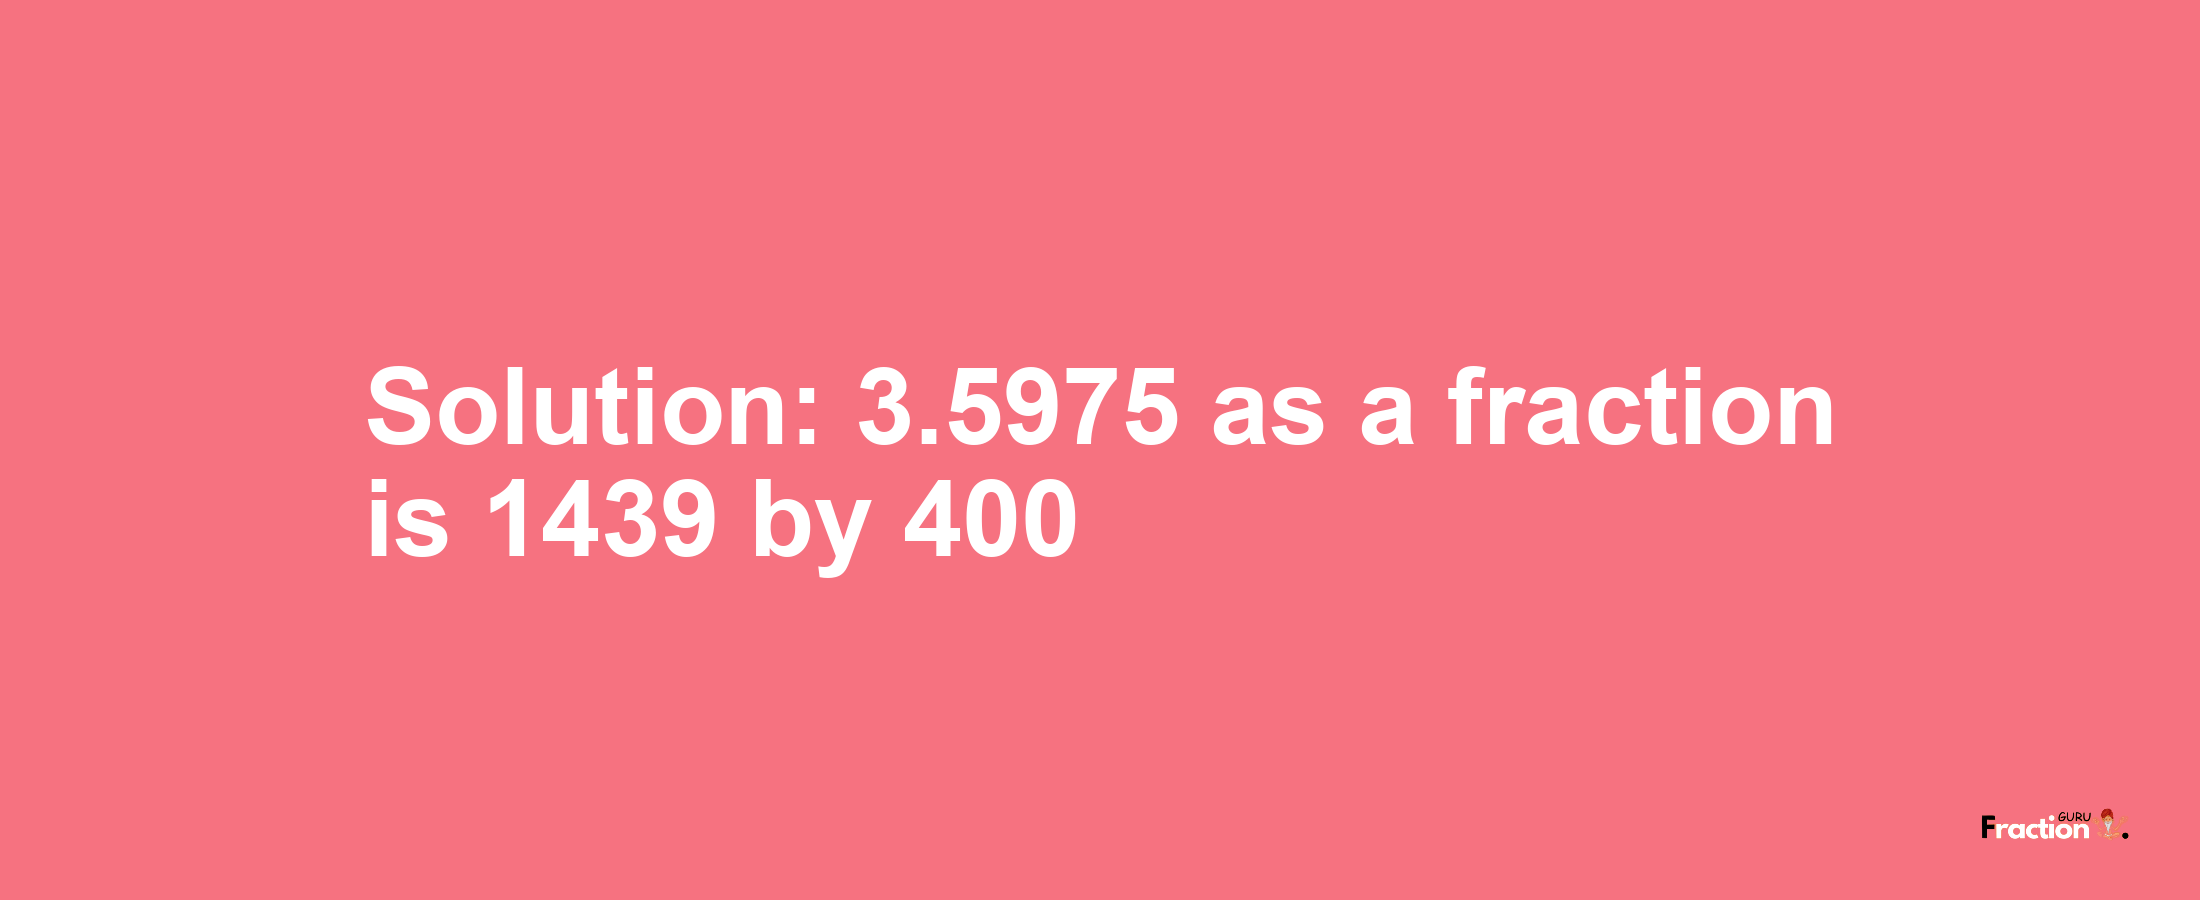 Solution:3.5975 as a fraction is 1439/400